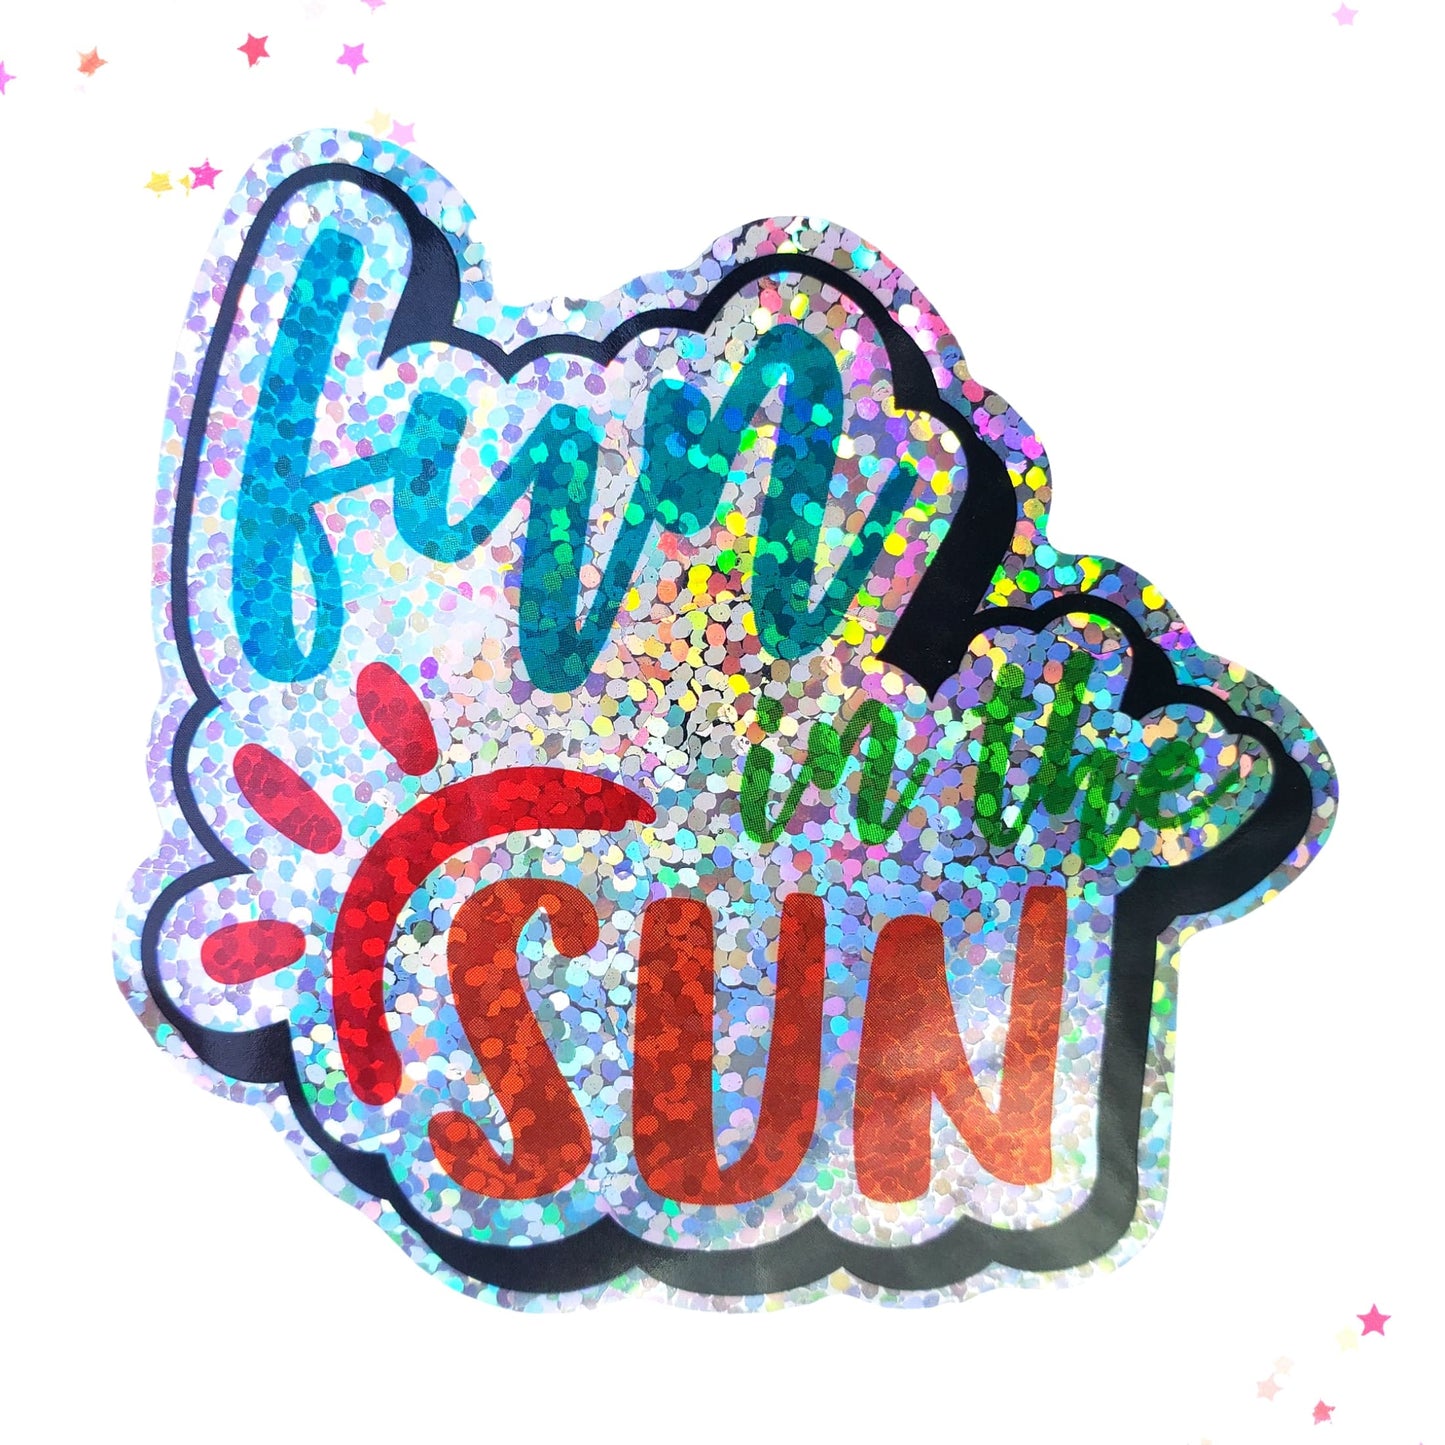 Premium Sticker - Sparkly Holographic Glitter Fun in the Sun from Confetti Kitty, Only 2.00